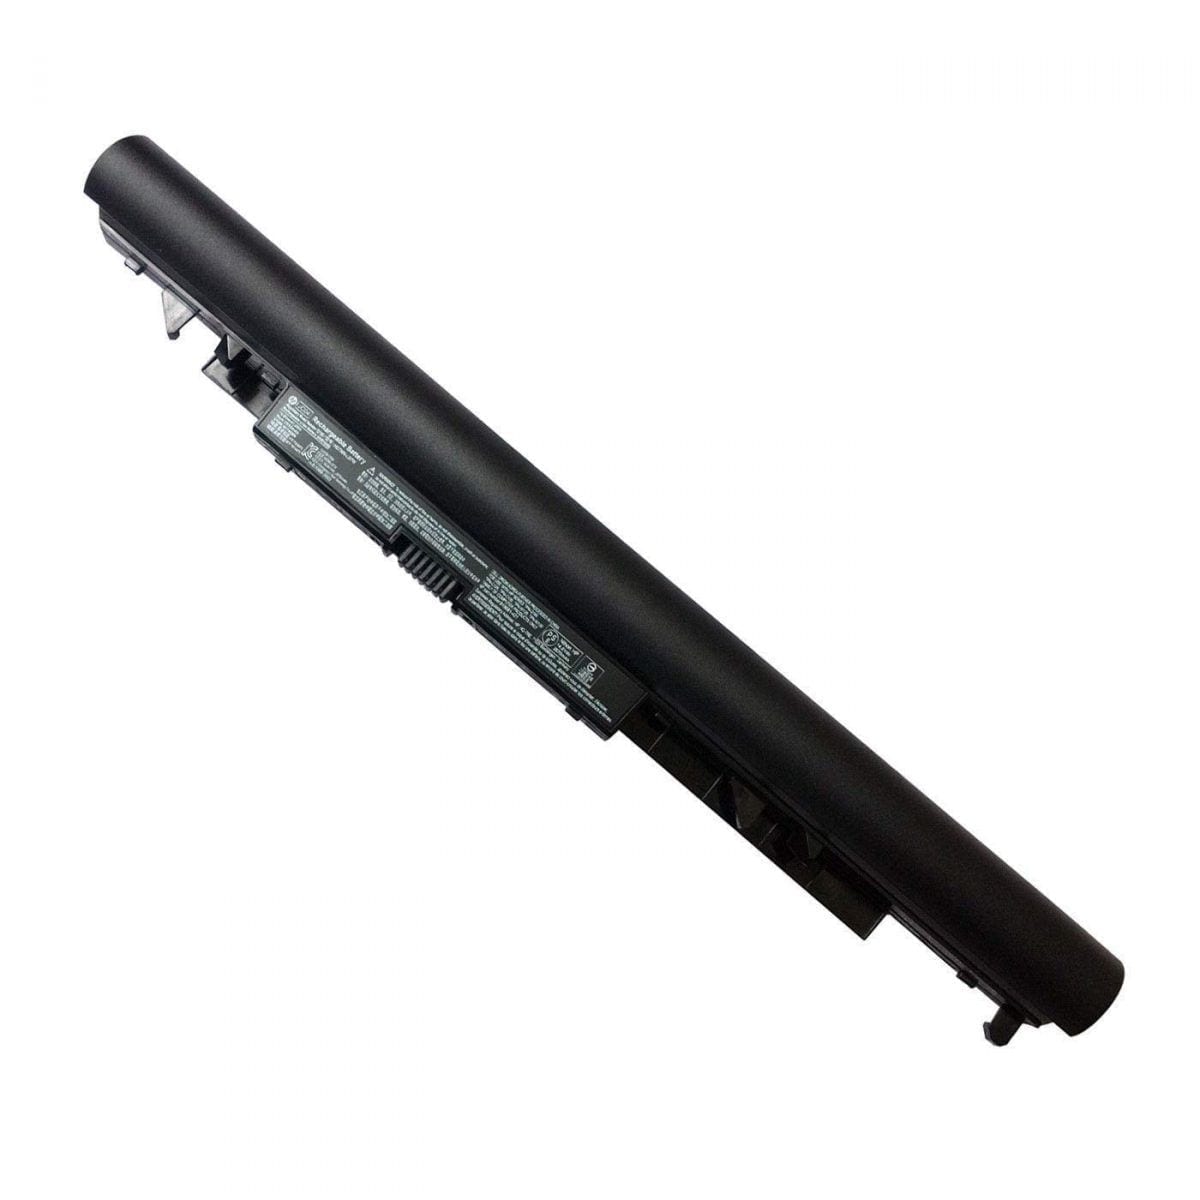 Original JC04 Laptop Battery compatible with HP 15-BS 15-BW 17-BS SERIES HQ-TRE71025 HSTNNHB7X TPN-C130 919701-850 